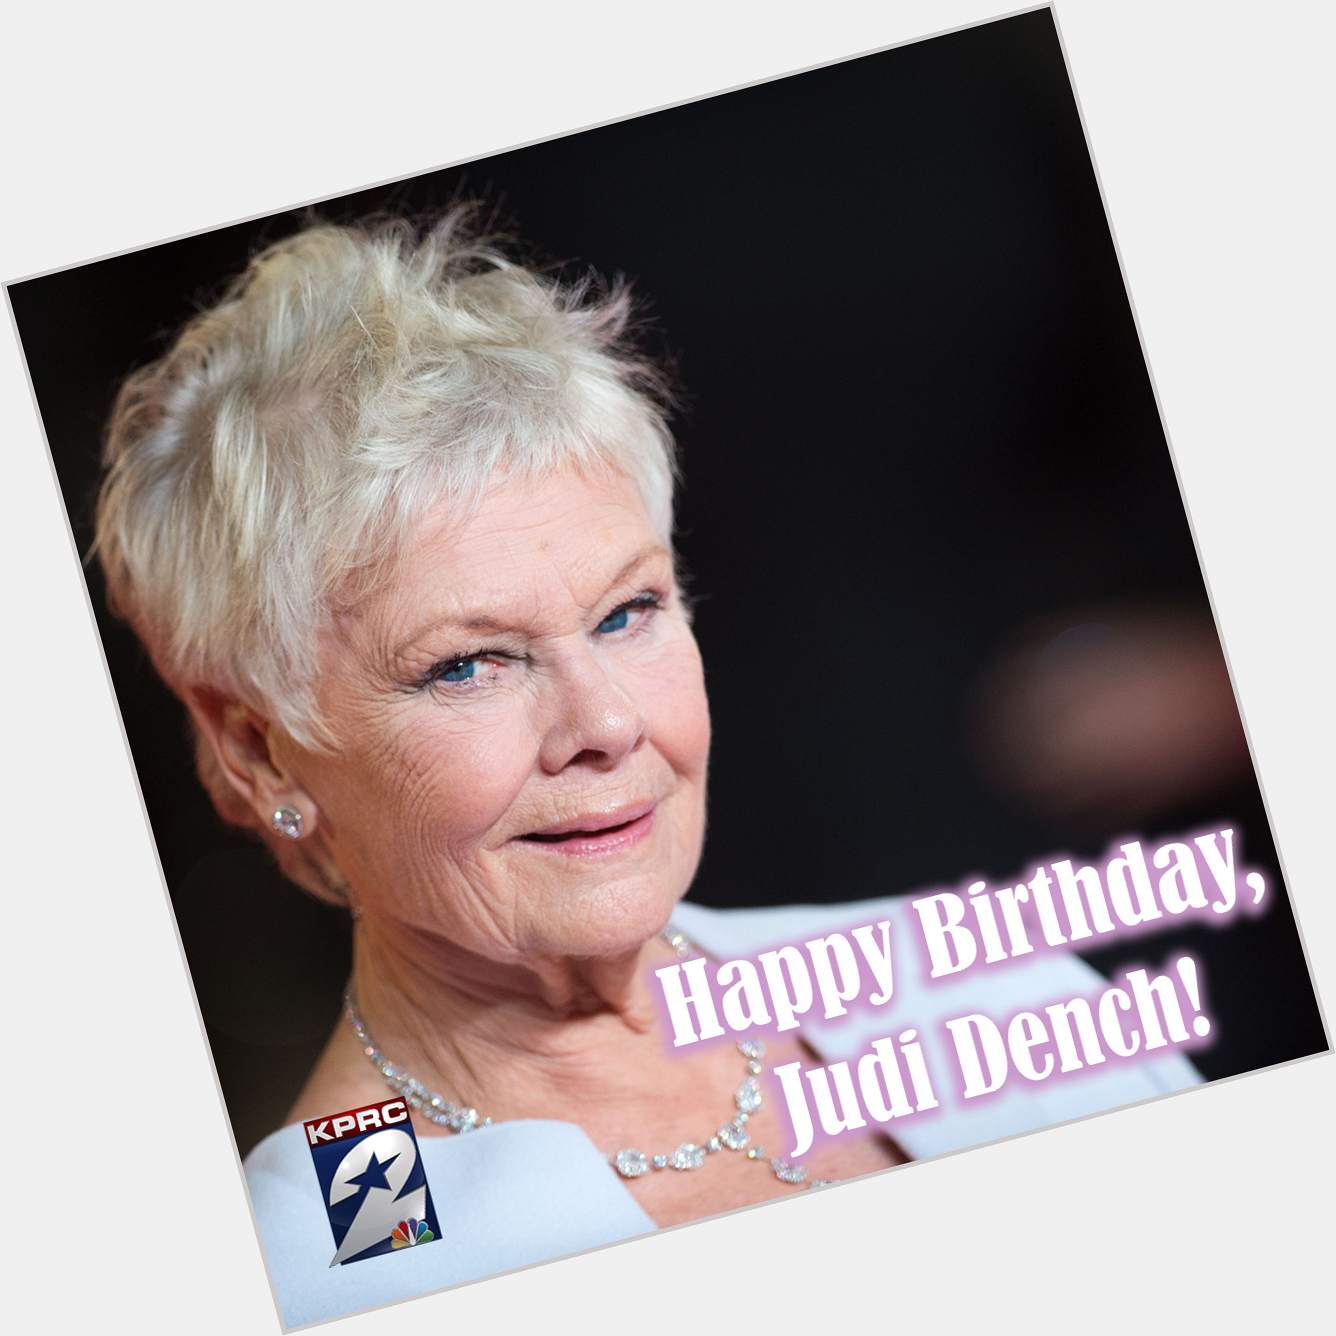 Happy Birthday, Judi Dench! The actress is 86 years old today. 